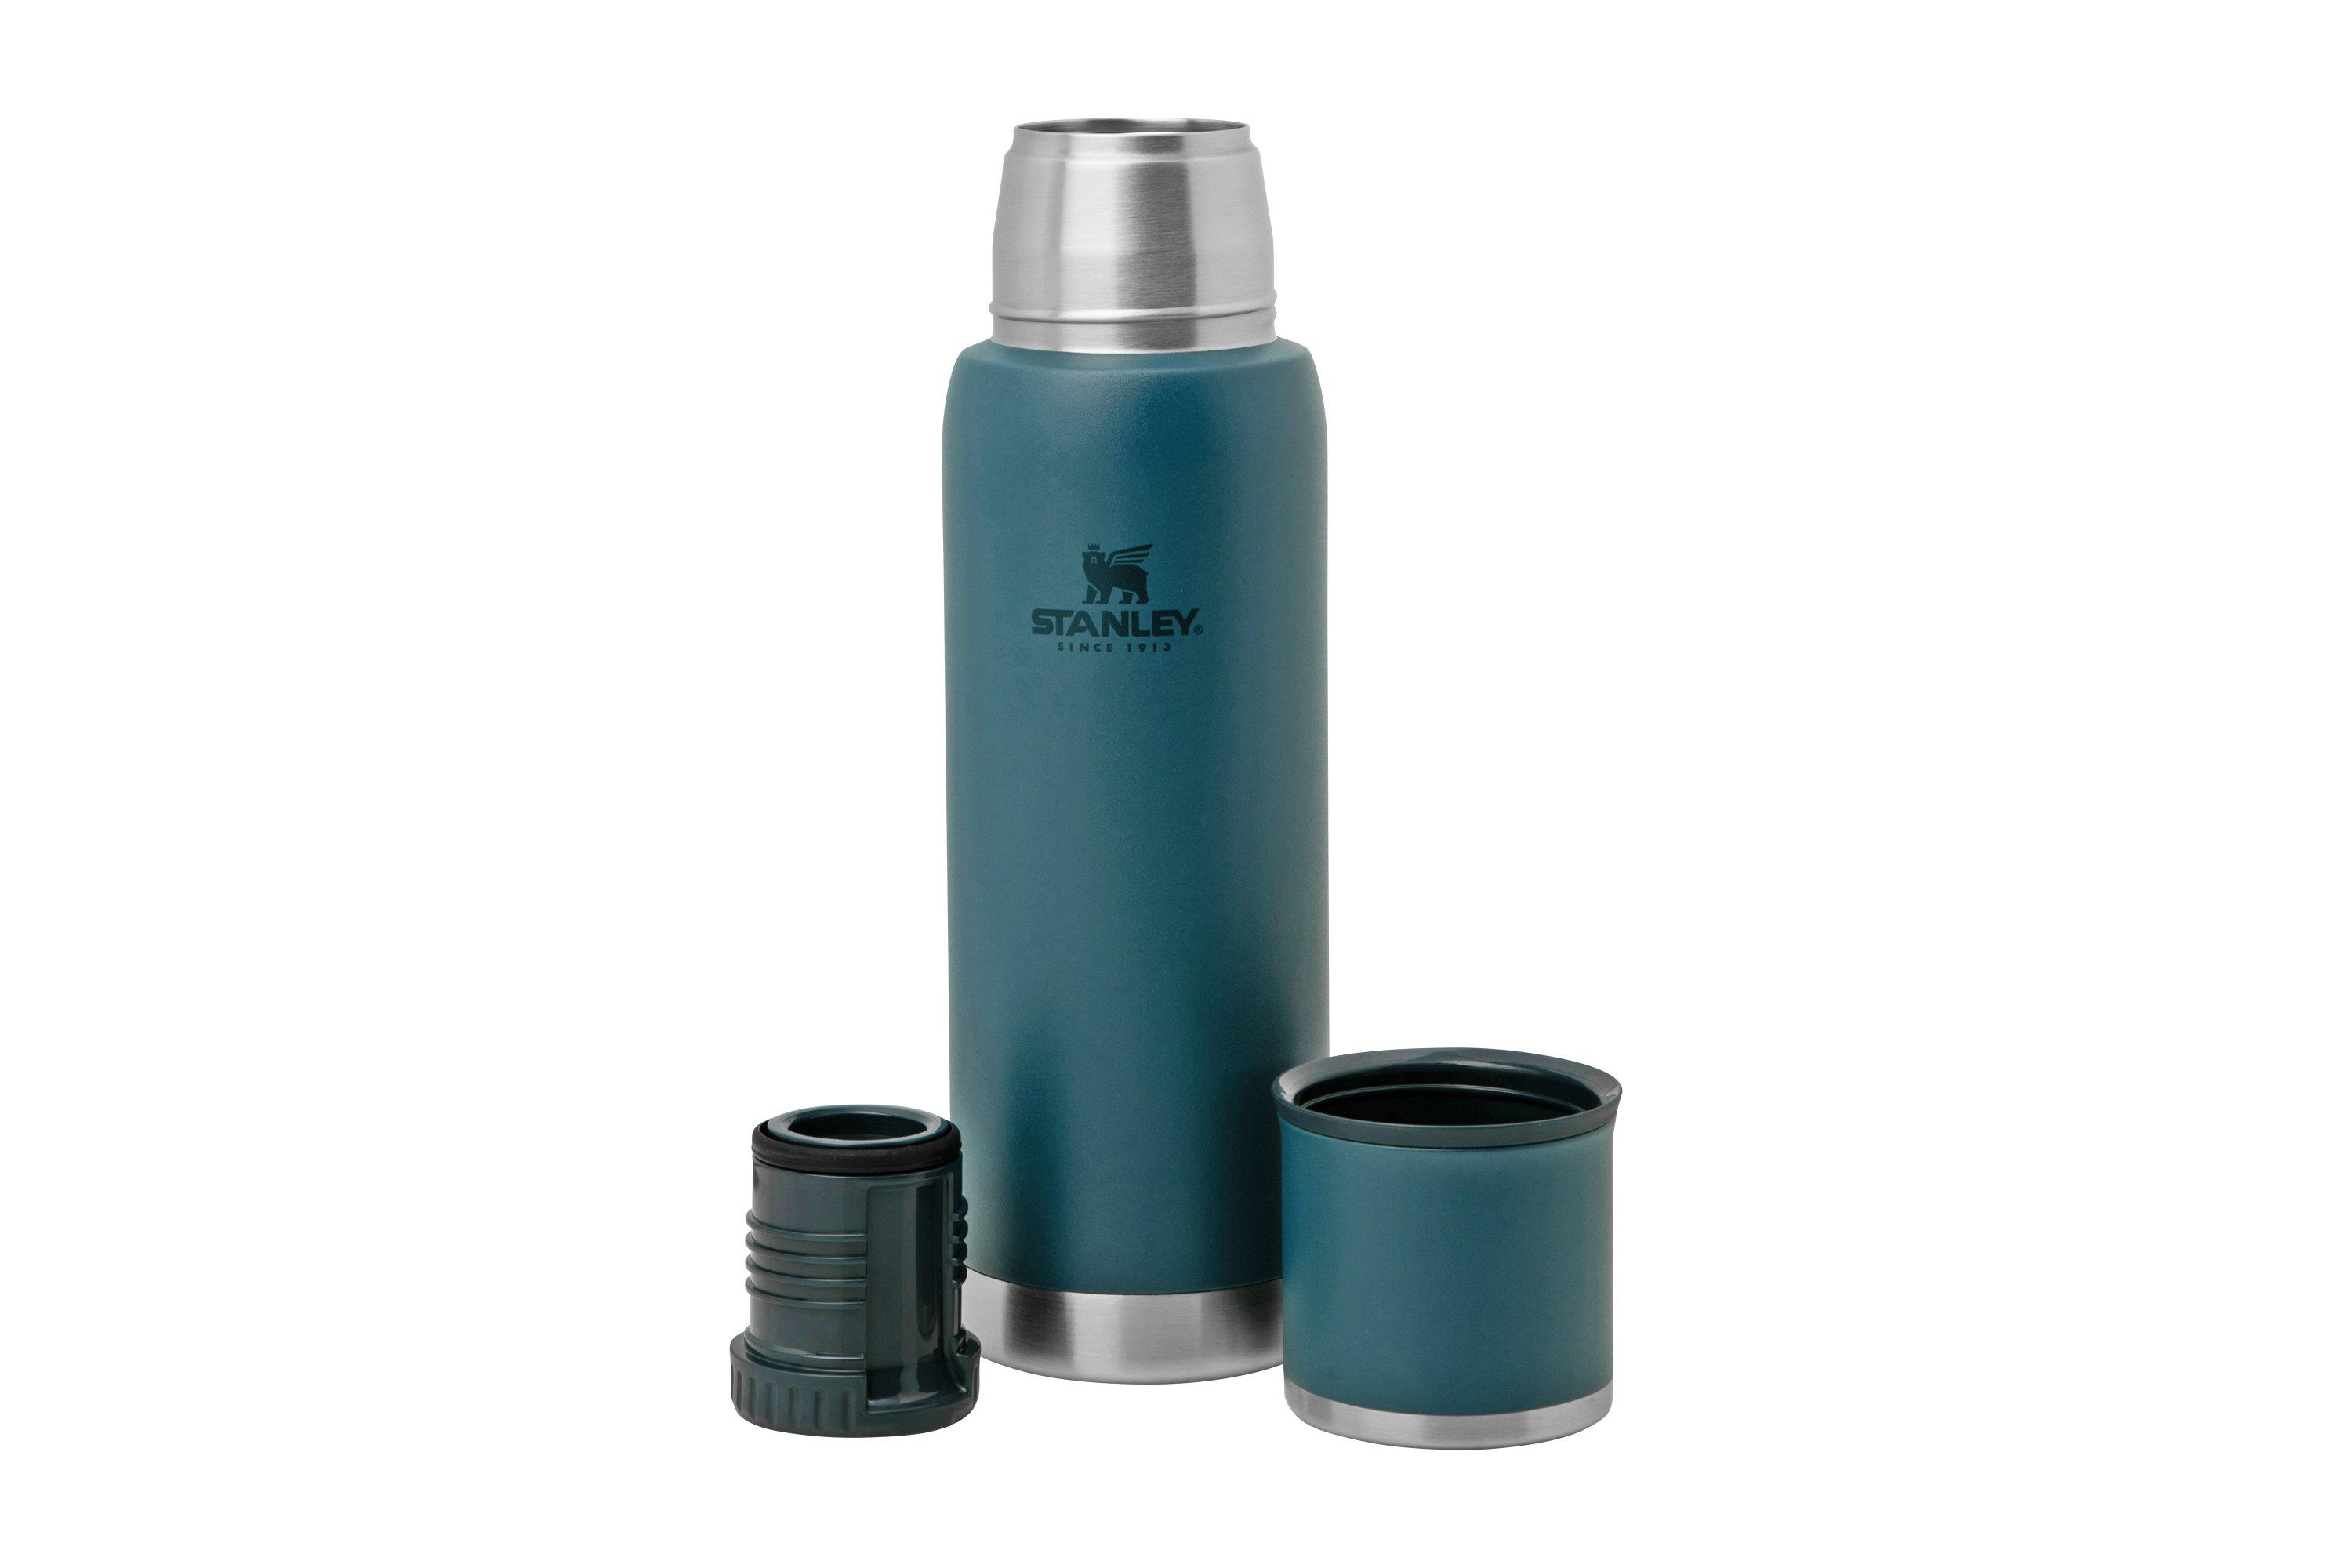 Stanley The Stainless Steel Vacuum Bottle 1L, green, thermos